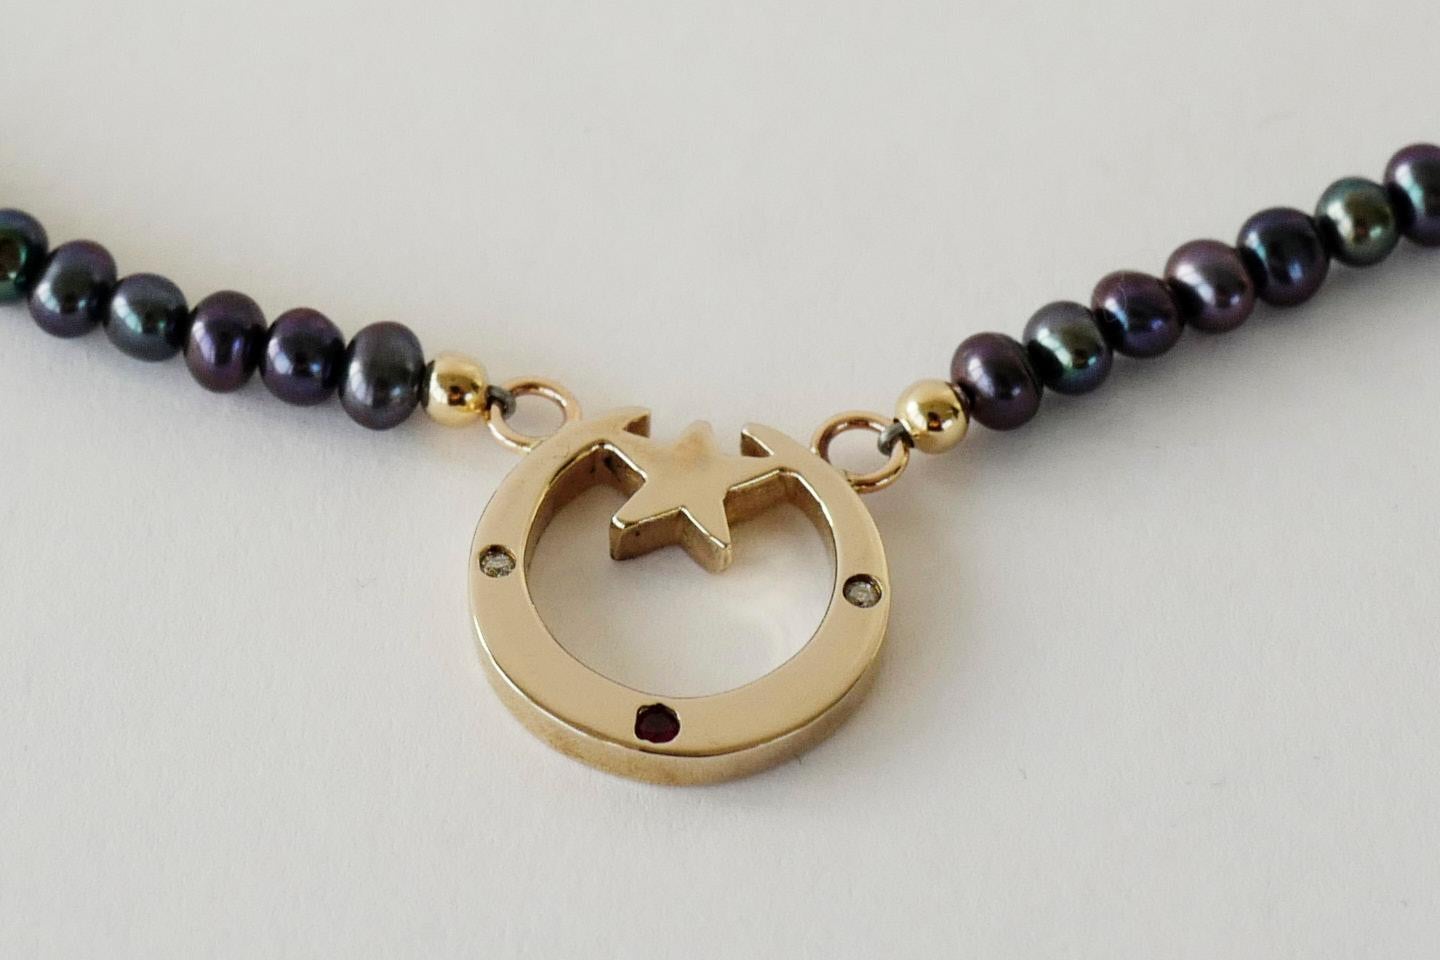 Round Cut Crescent Moon Gold Necklace Black Pearl White Diamond Ruby Dauphin For Sale